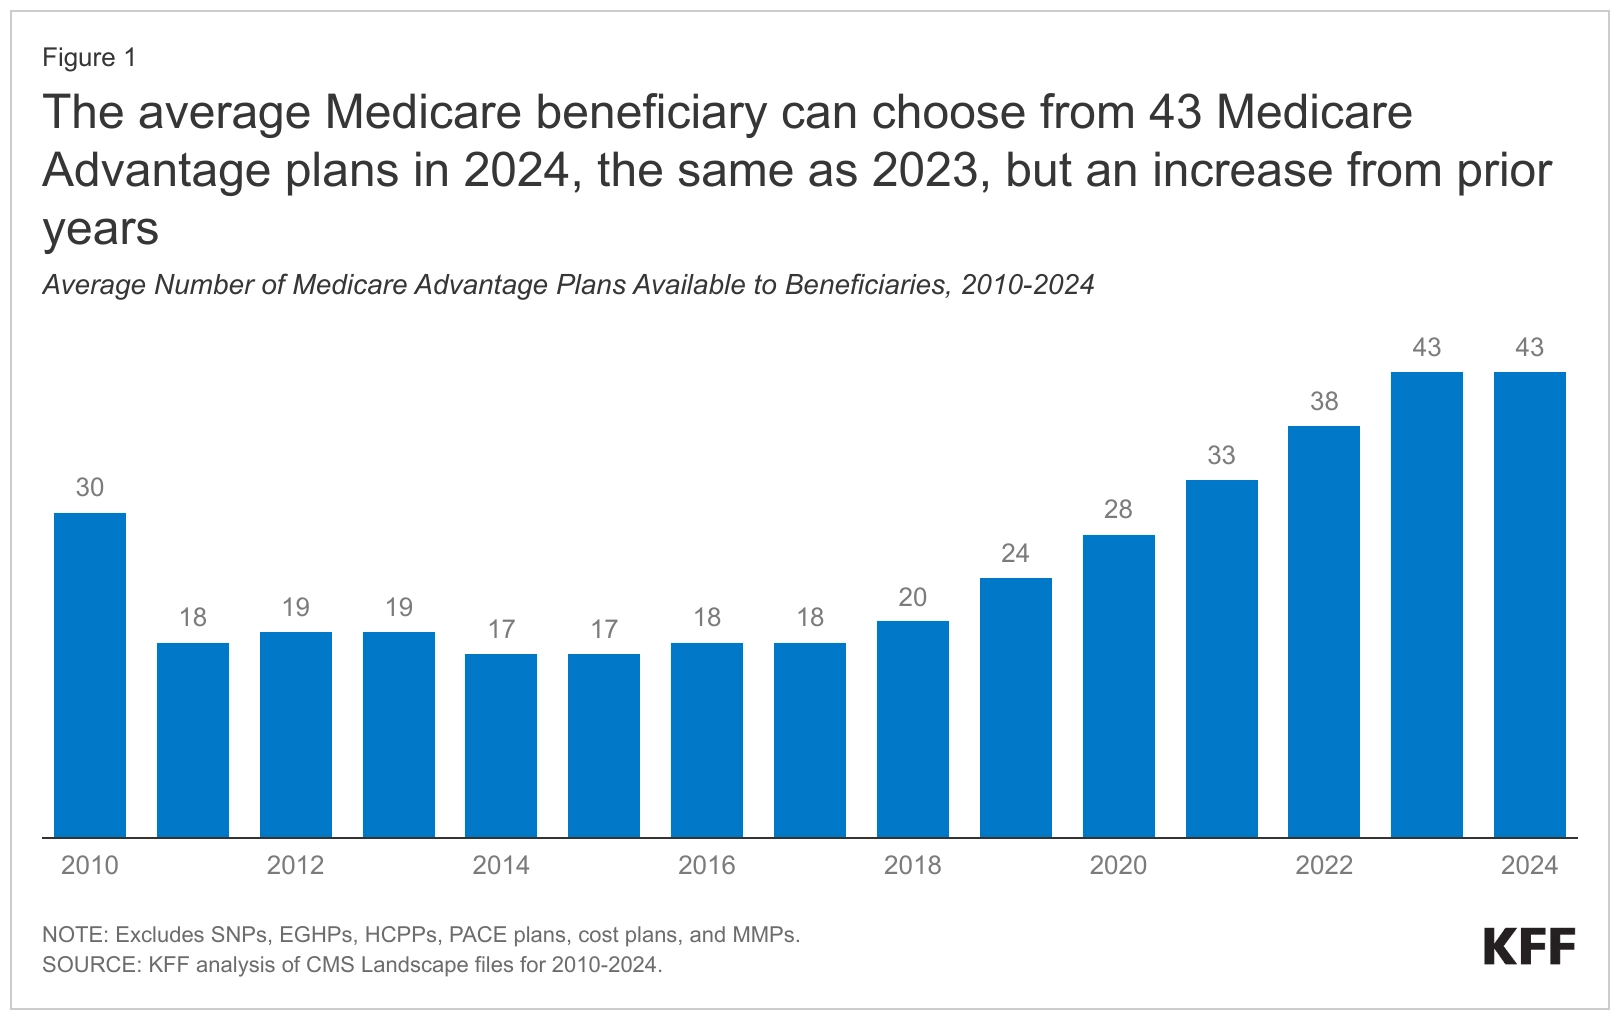 The Average Medicare beneficiary can choose from 43 Medicare Advantage plans in 2024